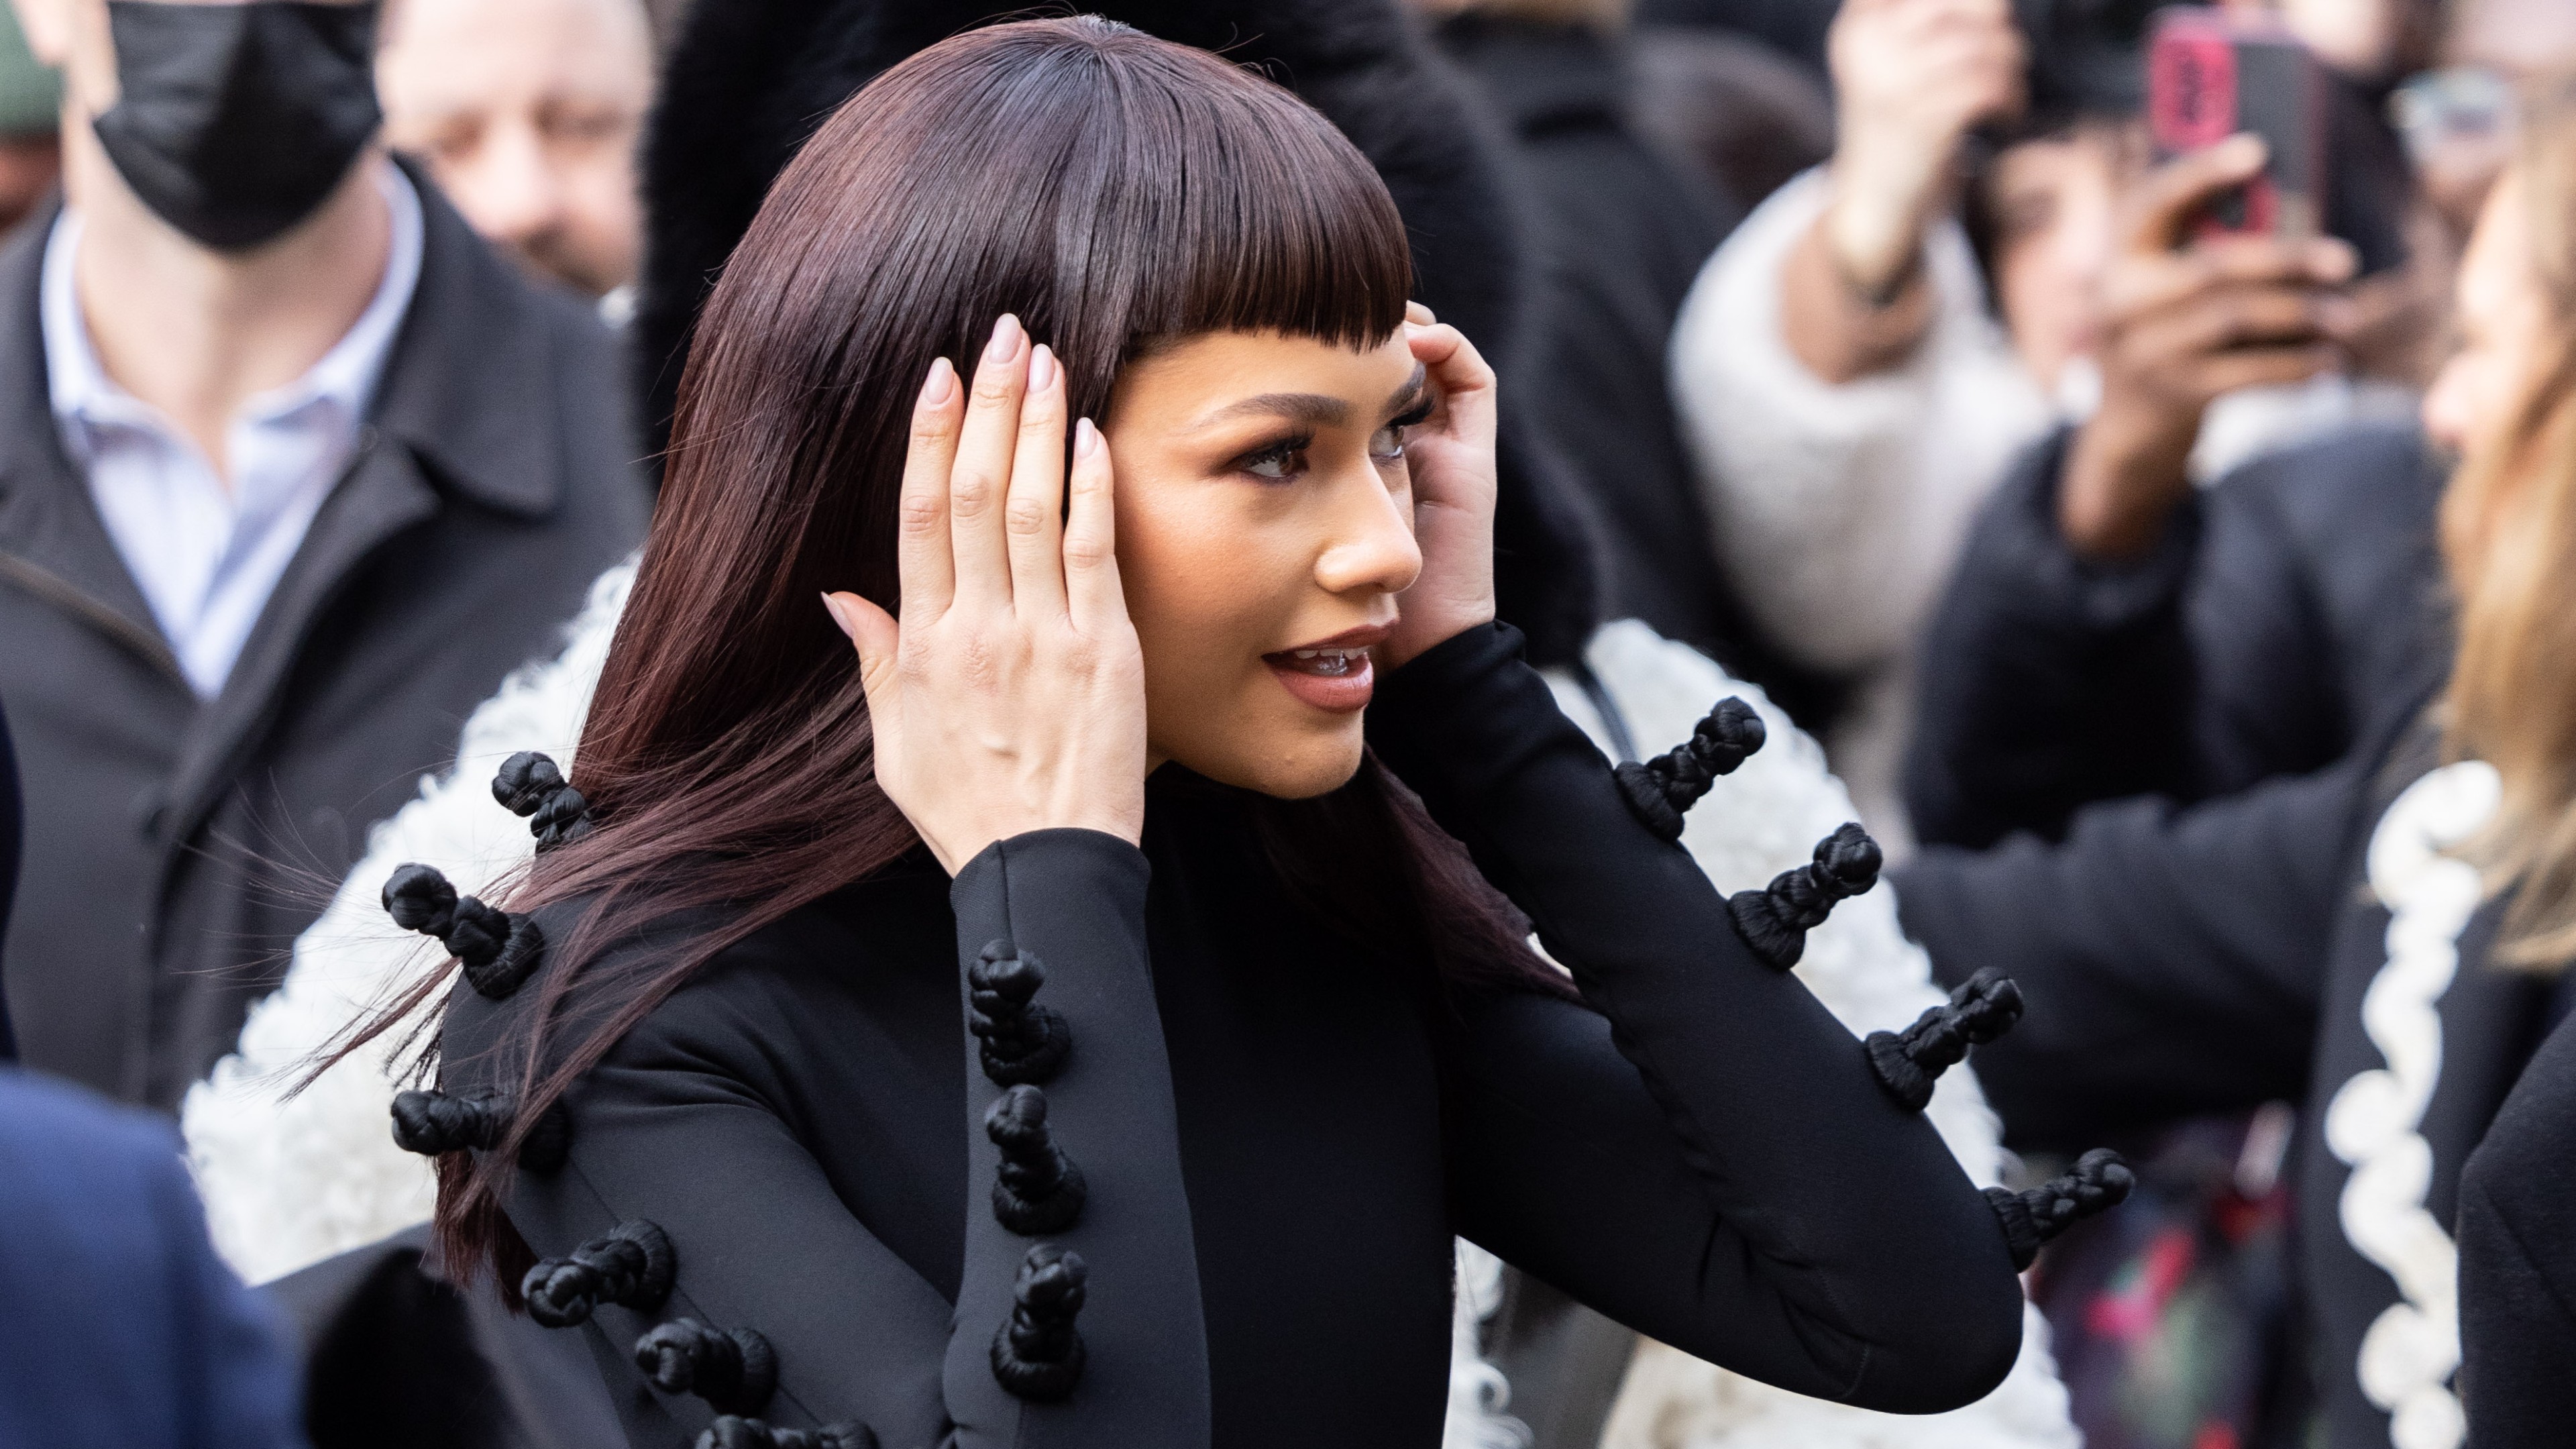 Micro Bangs: What Are They and How to Wear the Look